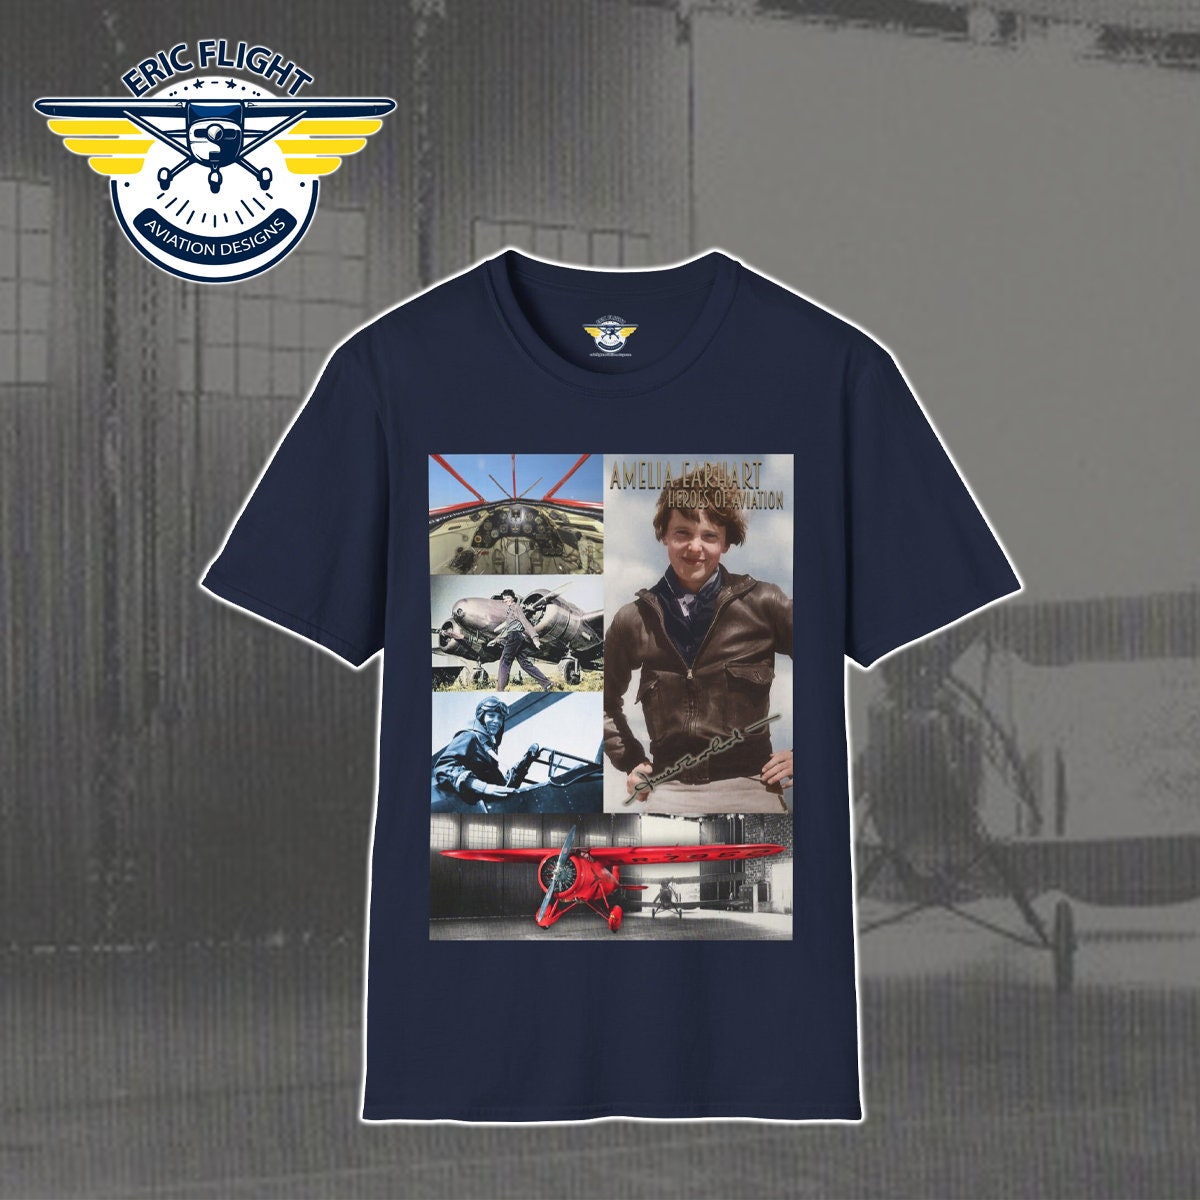 Amelia Earhart T Shirt Crew Neck Top Adult Extra Large Bust 